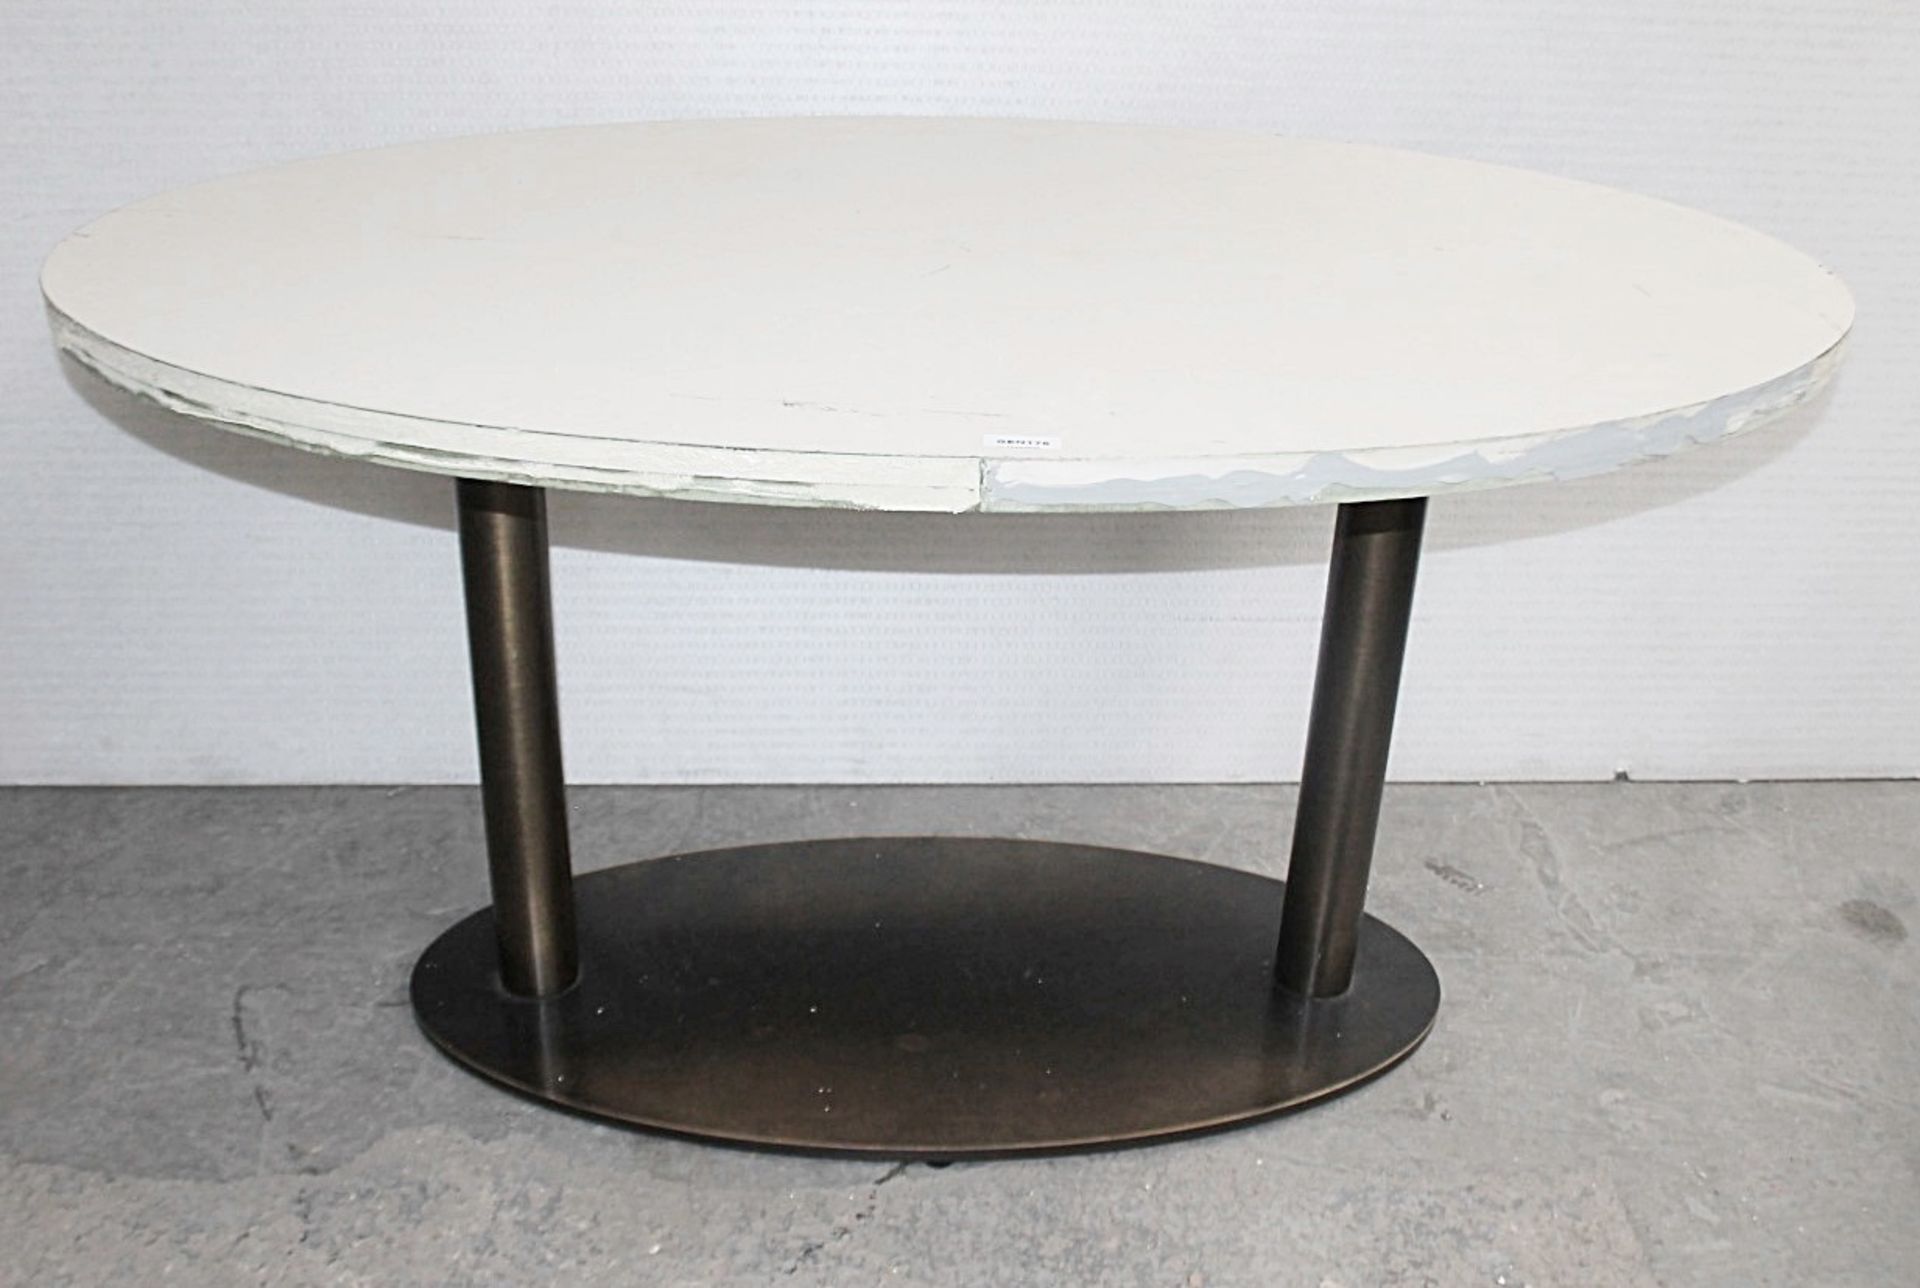 A Pair Of Oval Commercial Bistro Tables With A Brass Trim And Sturdy Metal Bases *Read Description* - Image 2 of 7